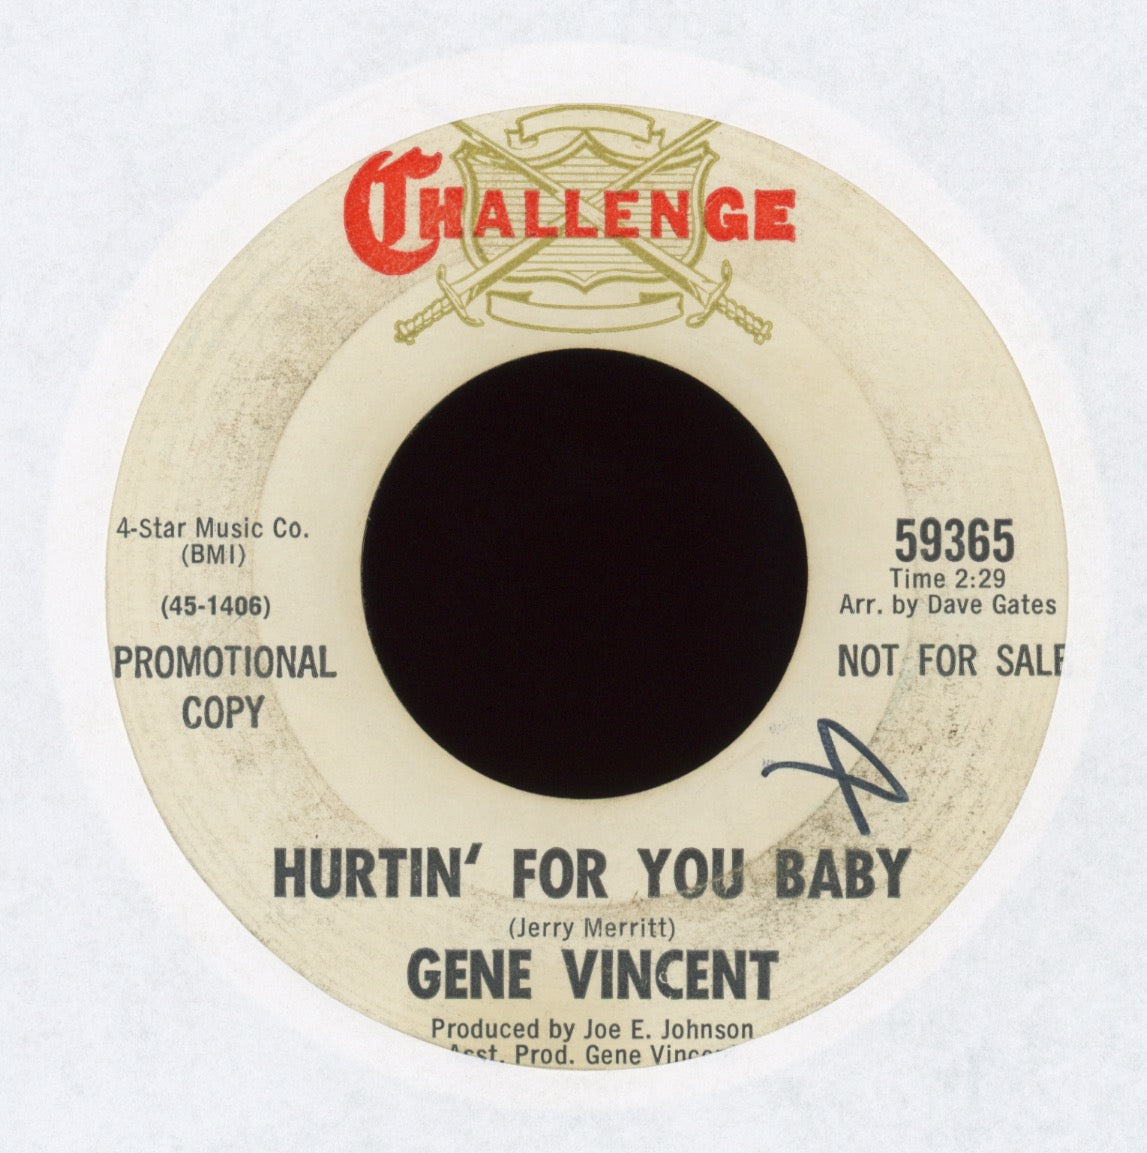 Gene Vincent - Born To Be A Rolling Stone on Challenge Promo